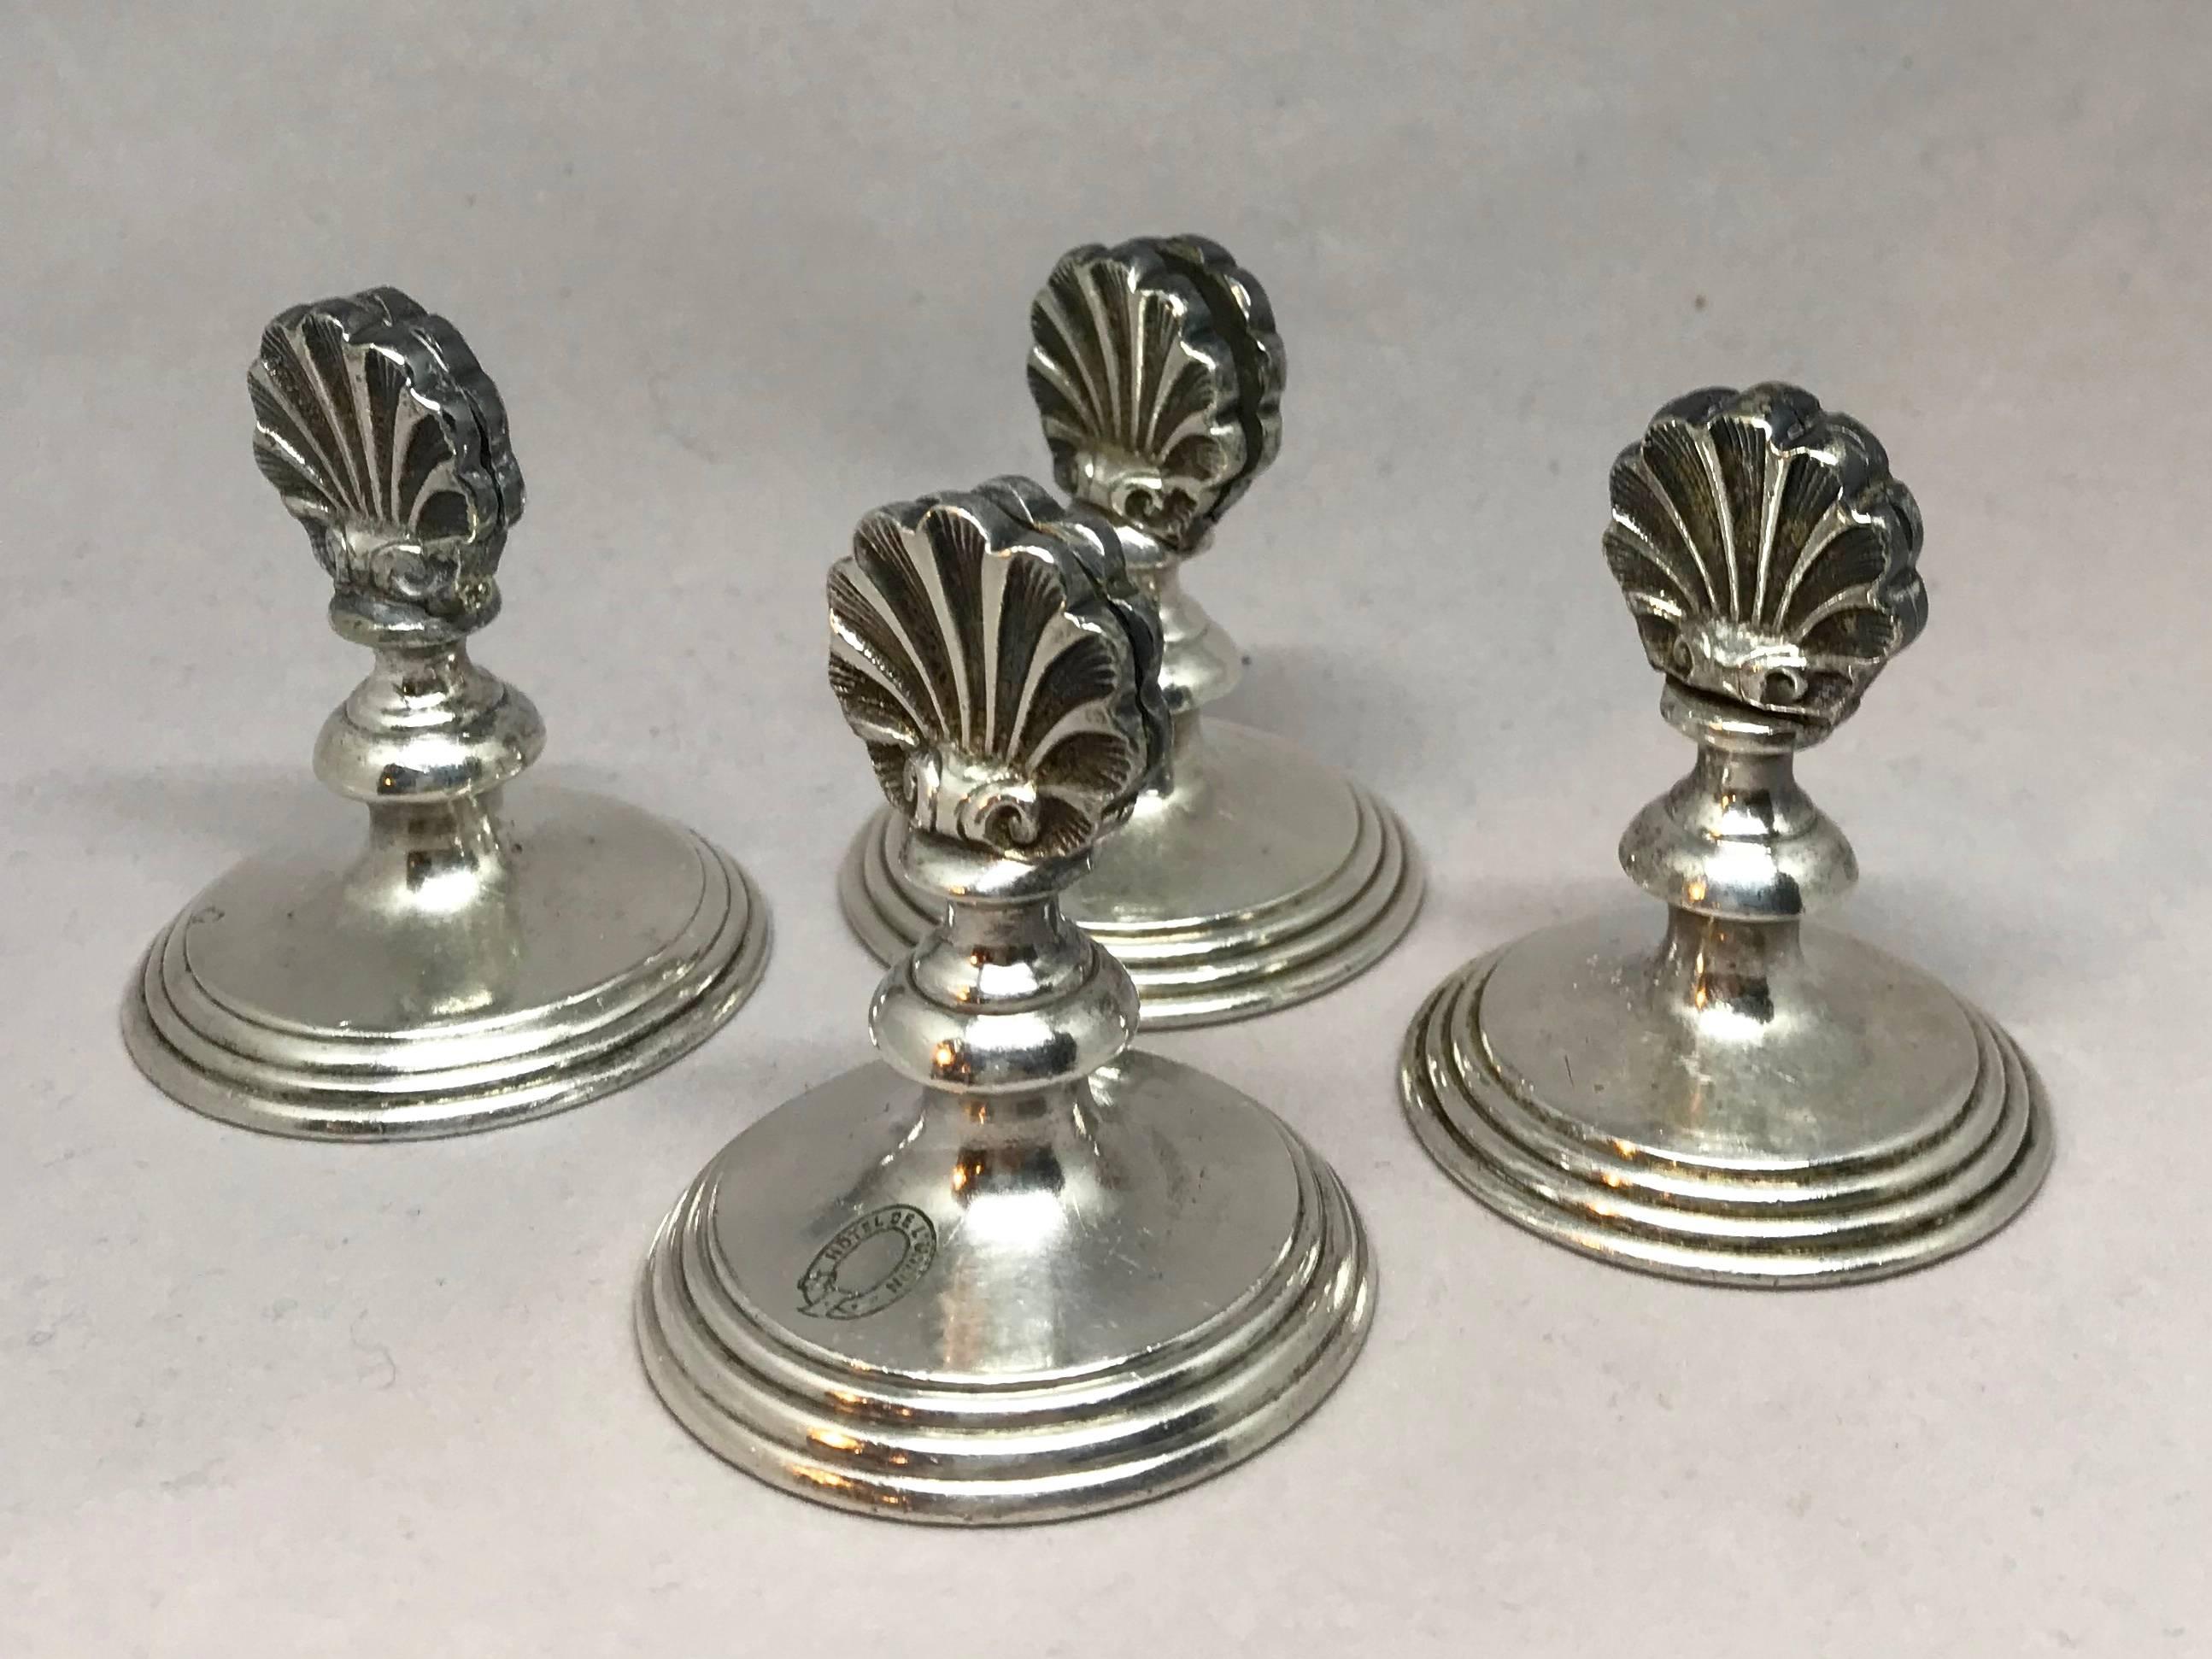  Austrian hotel silver place card holders. Set of four deco period silver plate place card holders in the form of shells, one stamped Hotel de L'Union. Stamps for Art.Krupp Berndorf with bear insignia. Austria, circa 1930.
Dimensions: 2" Dia x